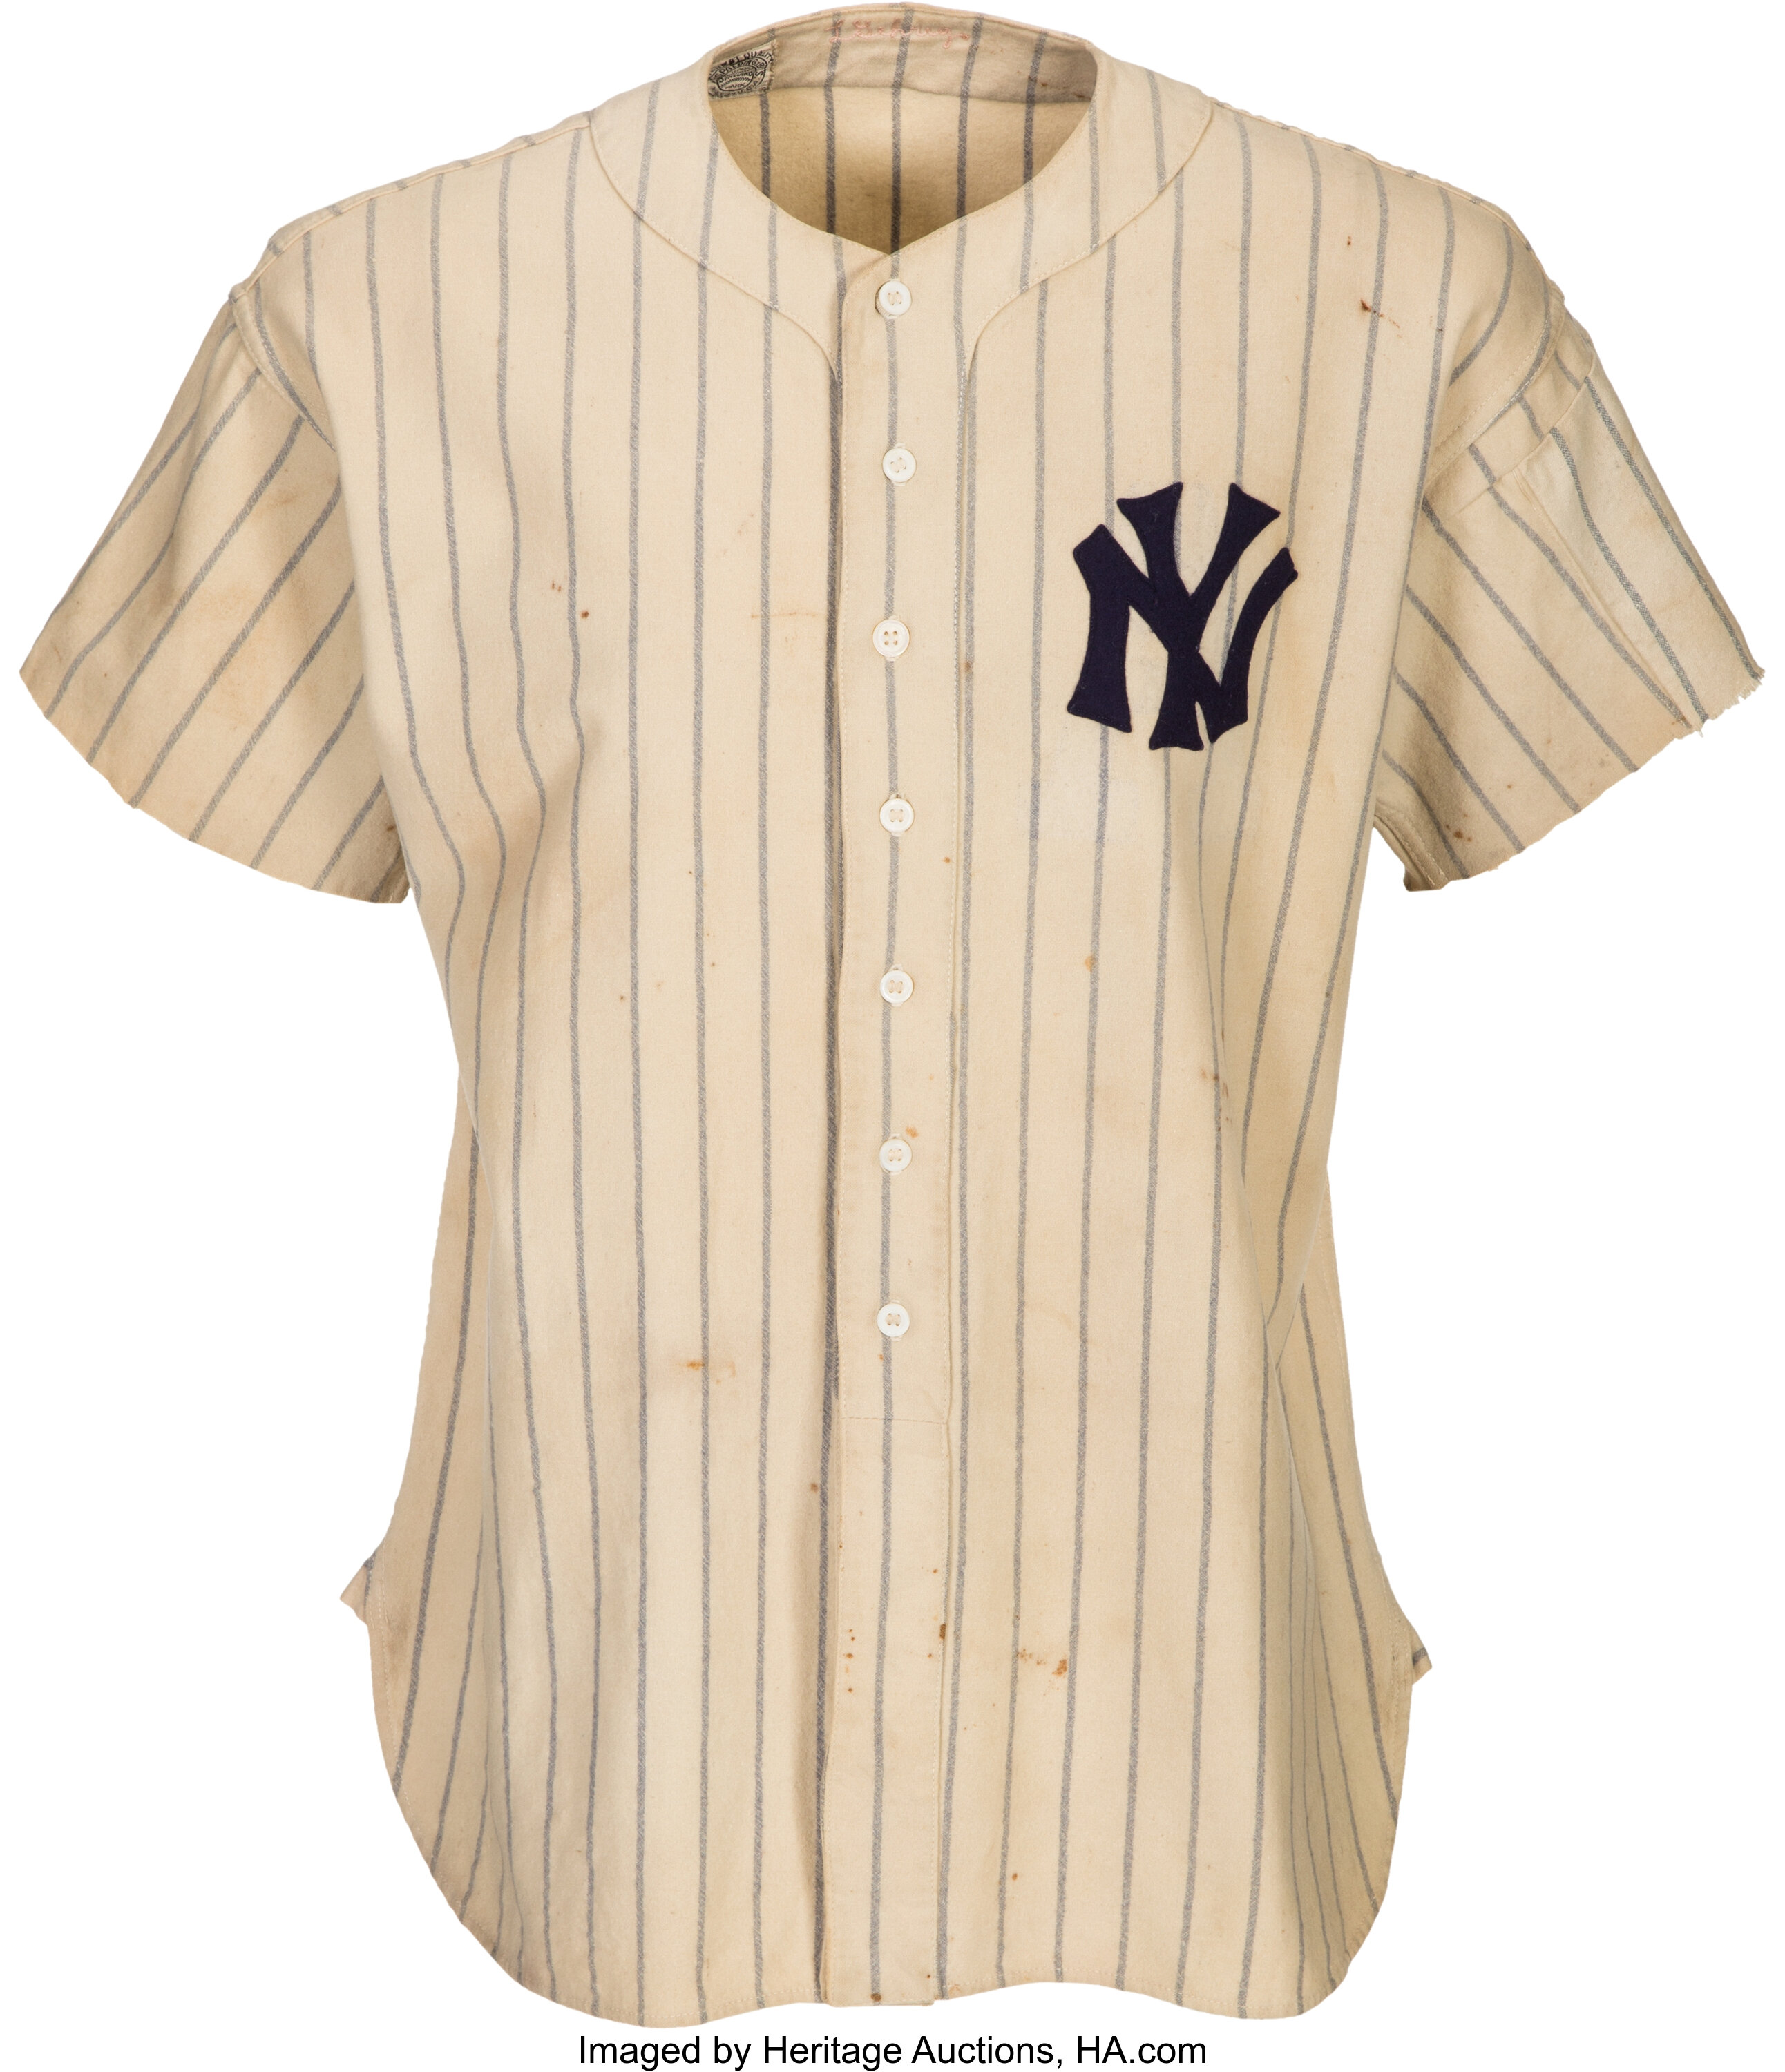 Lou Gehrig's Jersey from July 4, 1939, 75 years ago today, …